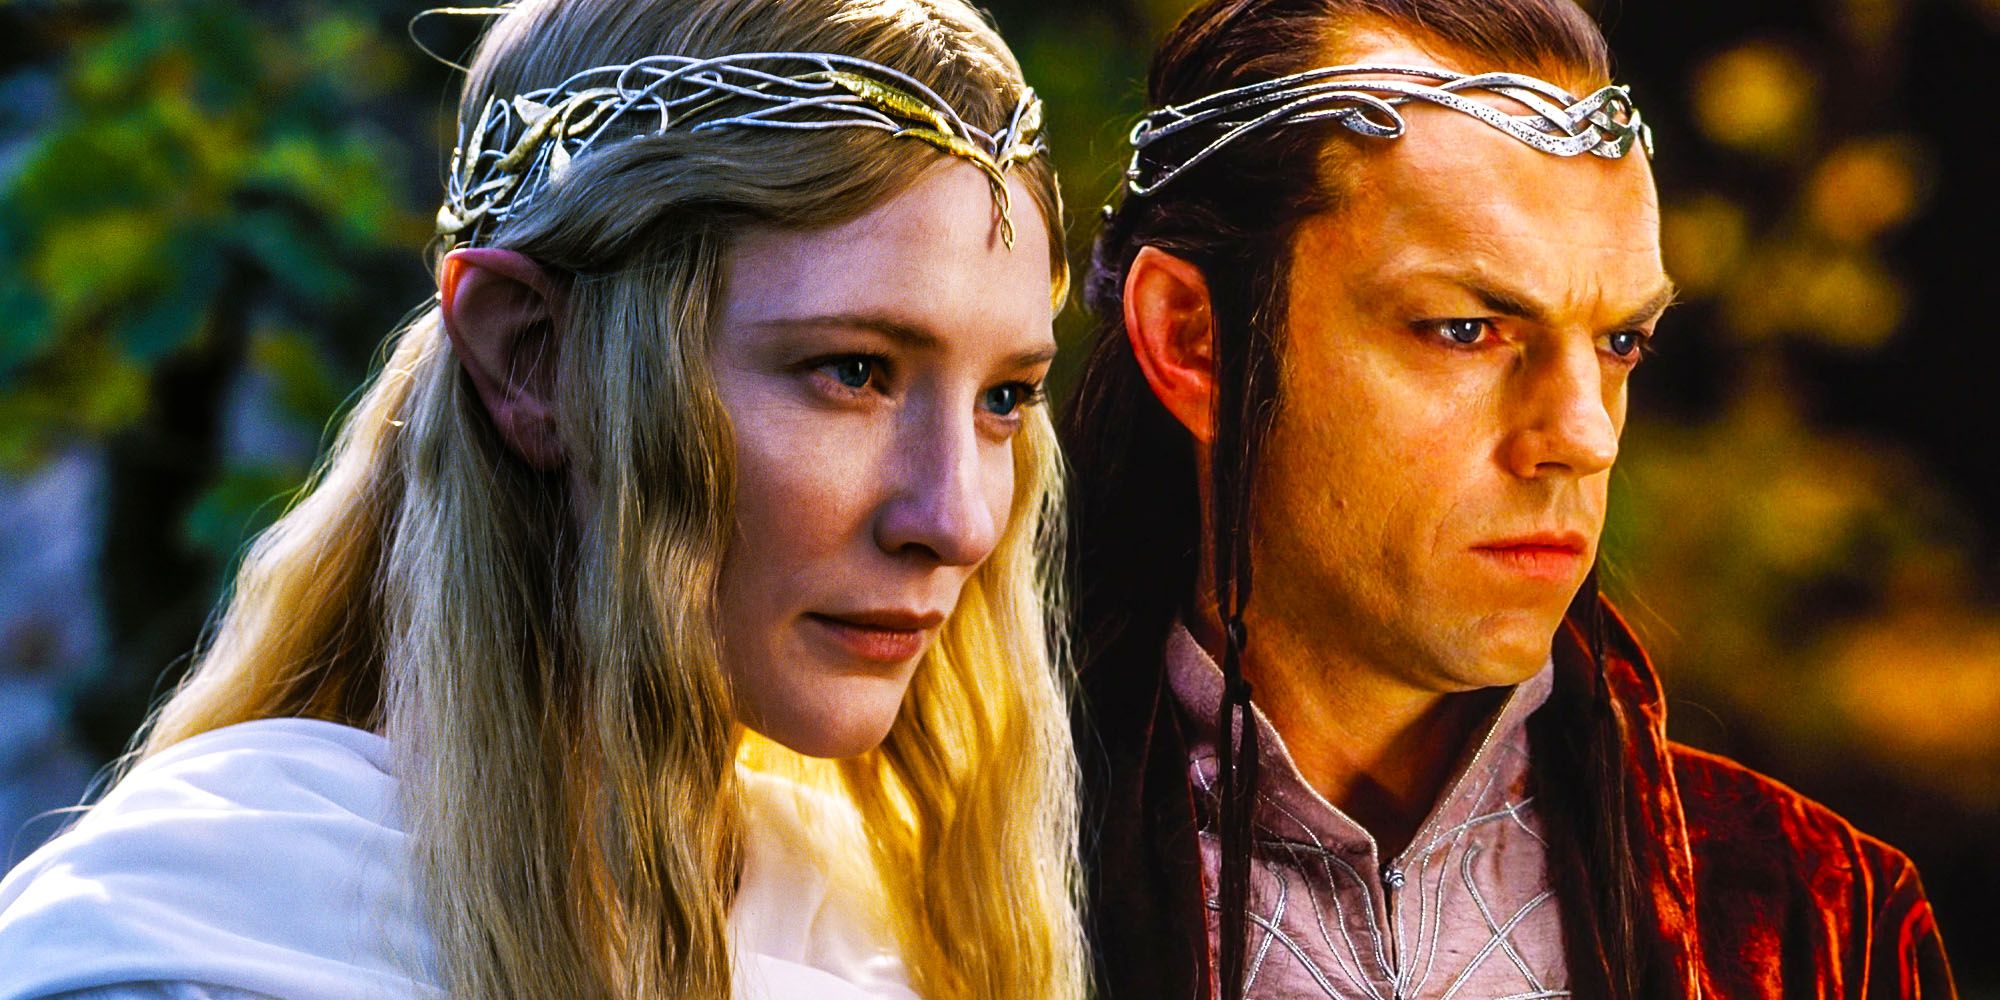 Galadriel builds a fellowship of her own in latest 'Rings of Power' trailer